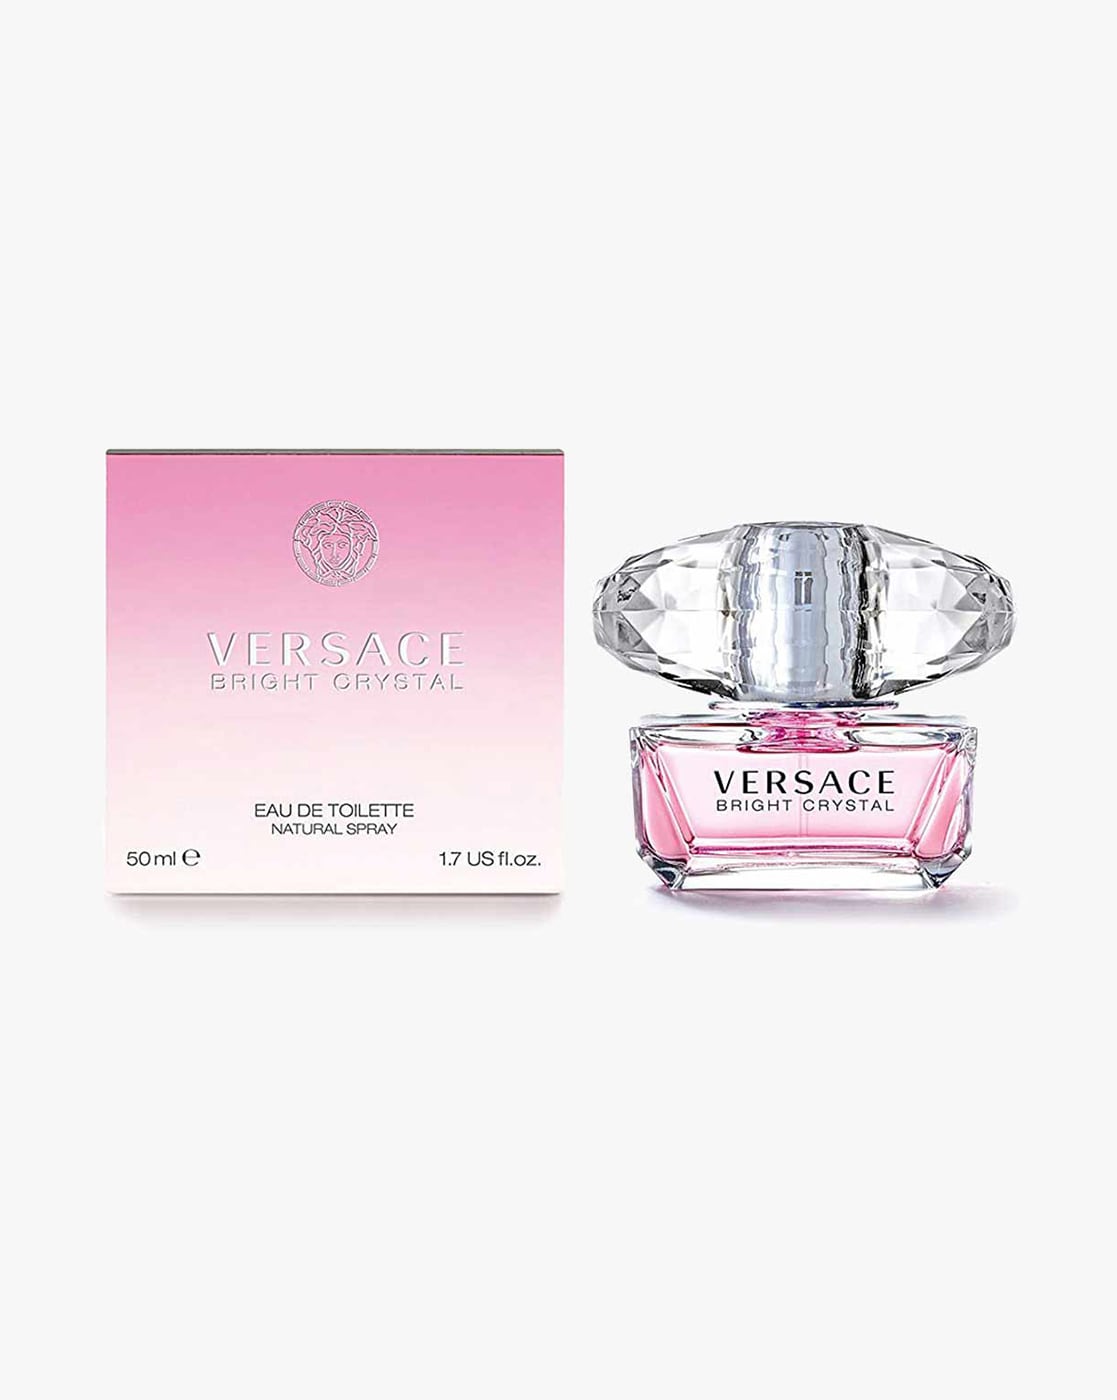 Buy Versace Bright Crystal EDT Online at Best Price in India | Parcos